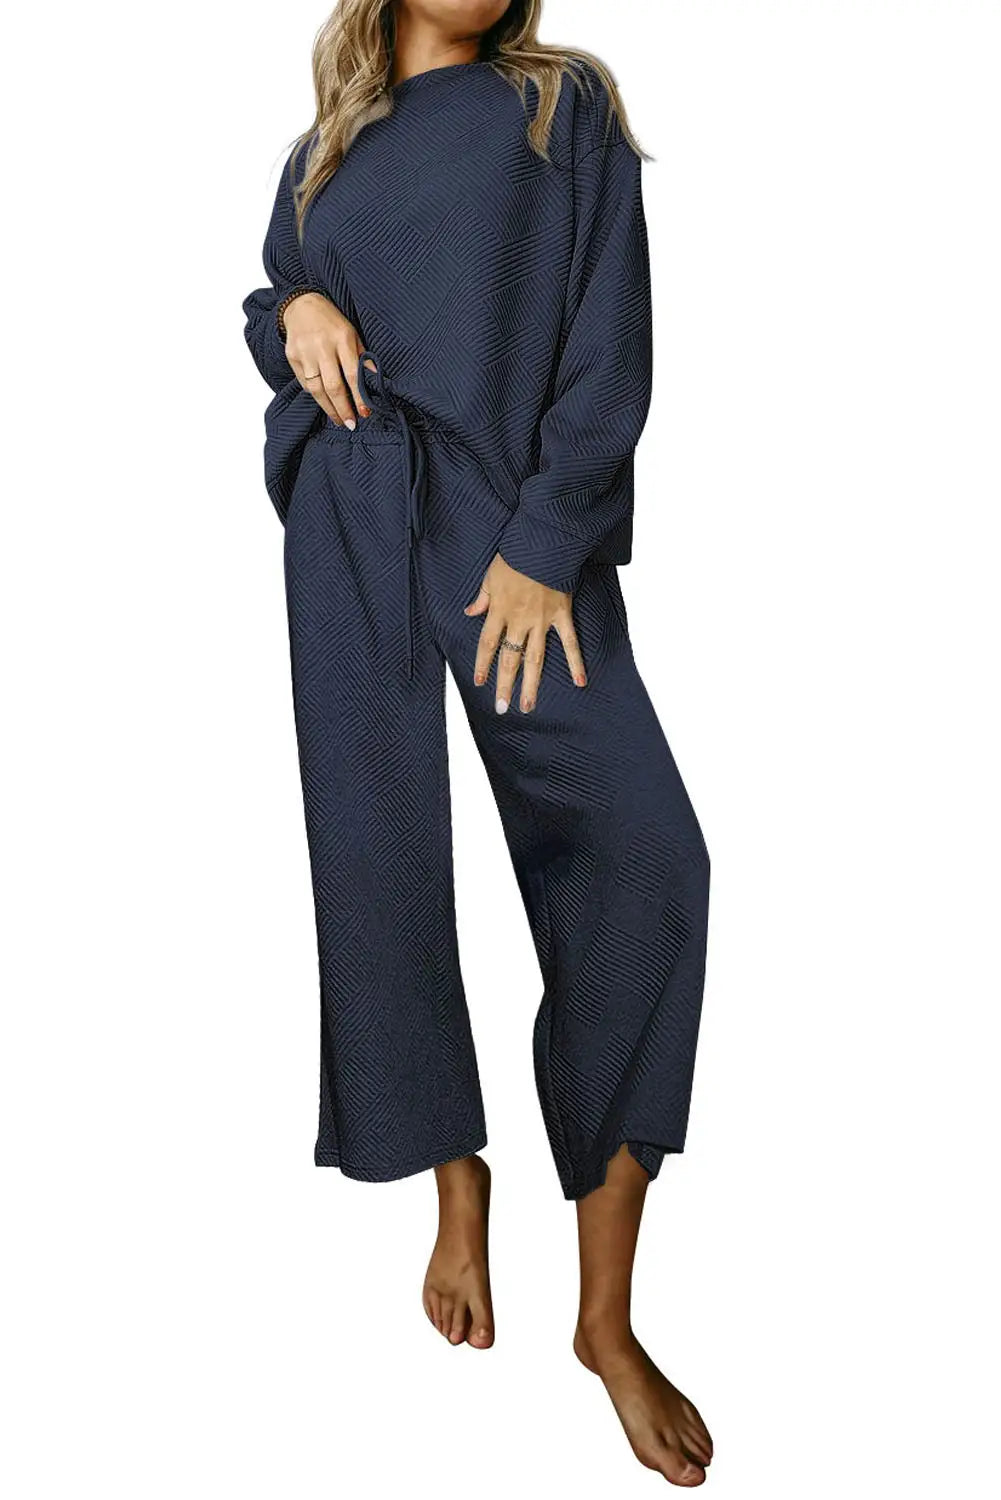 Navy blue ultra loose textured 2pcs slouchy outfit - pants sets